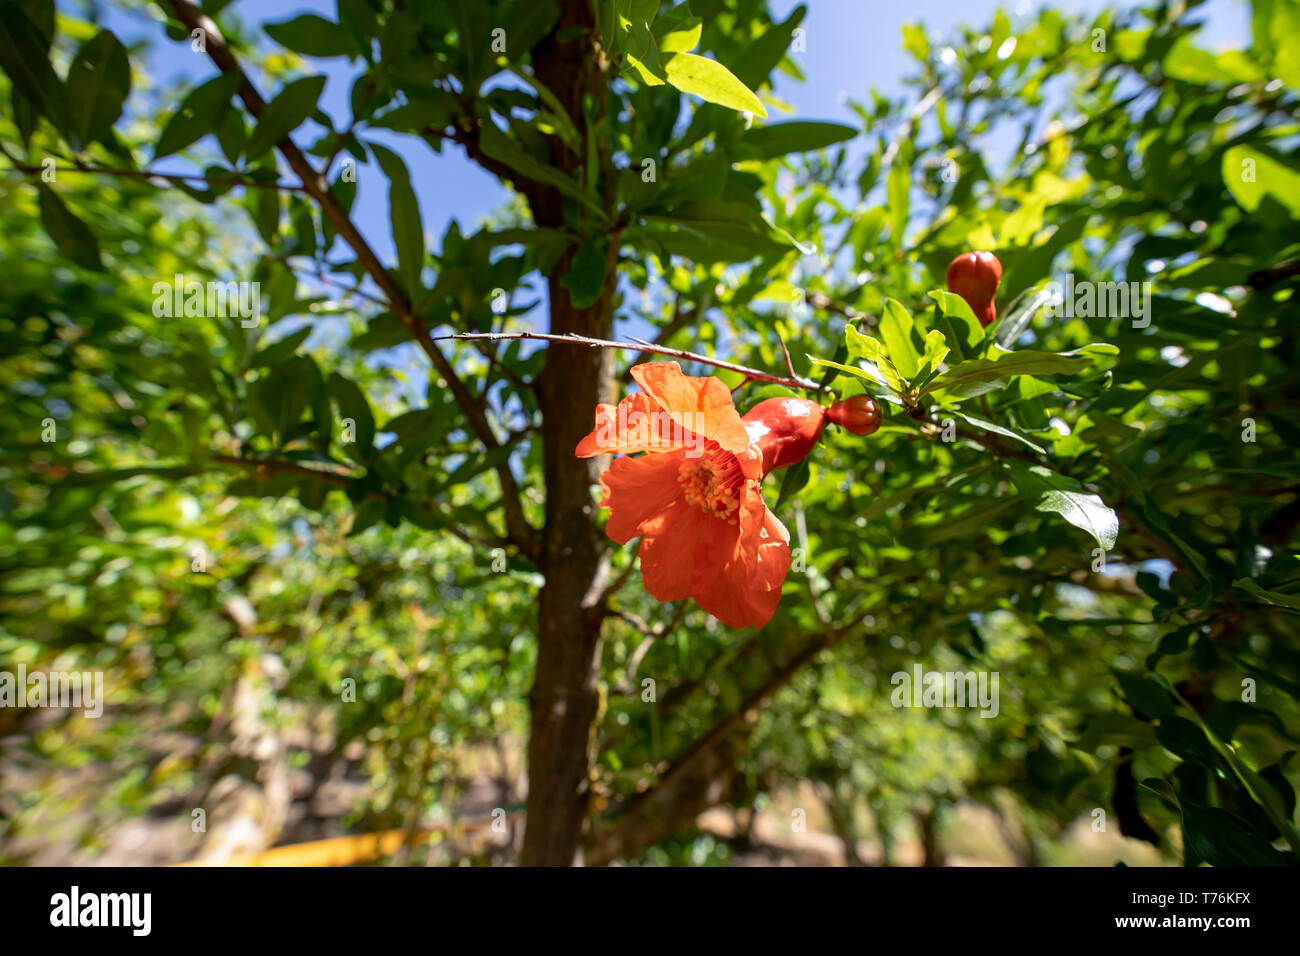 Red pomegranate flower close-up on a blurred background of green foliage Stock Photo